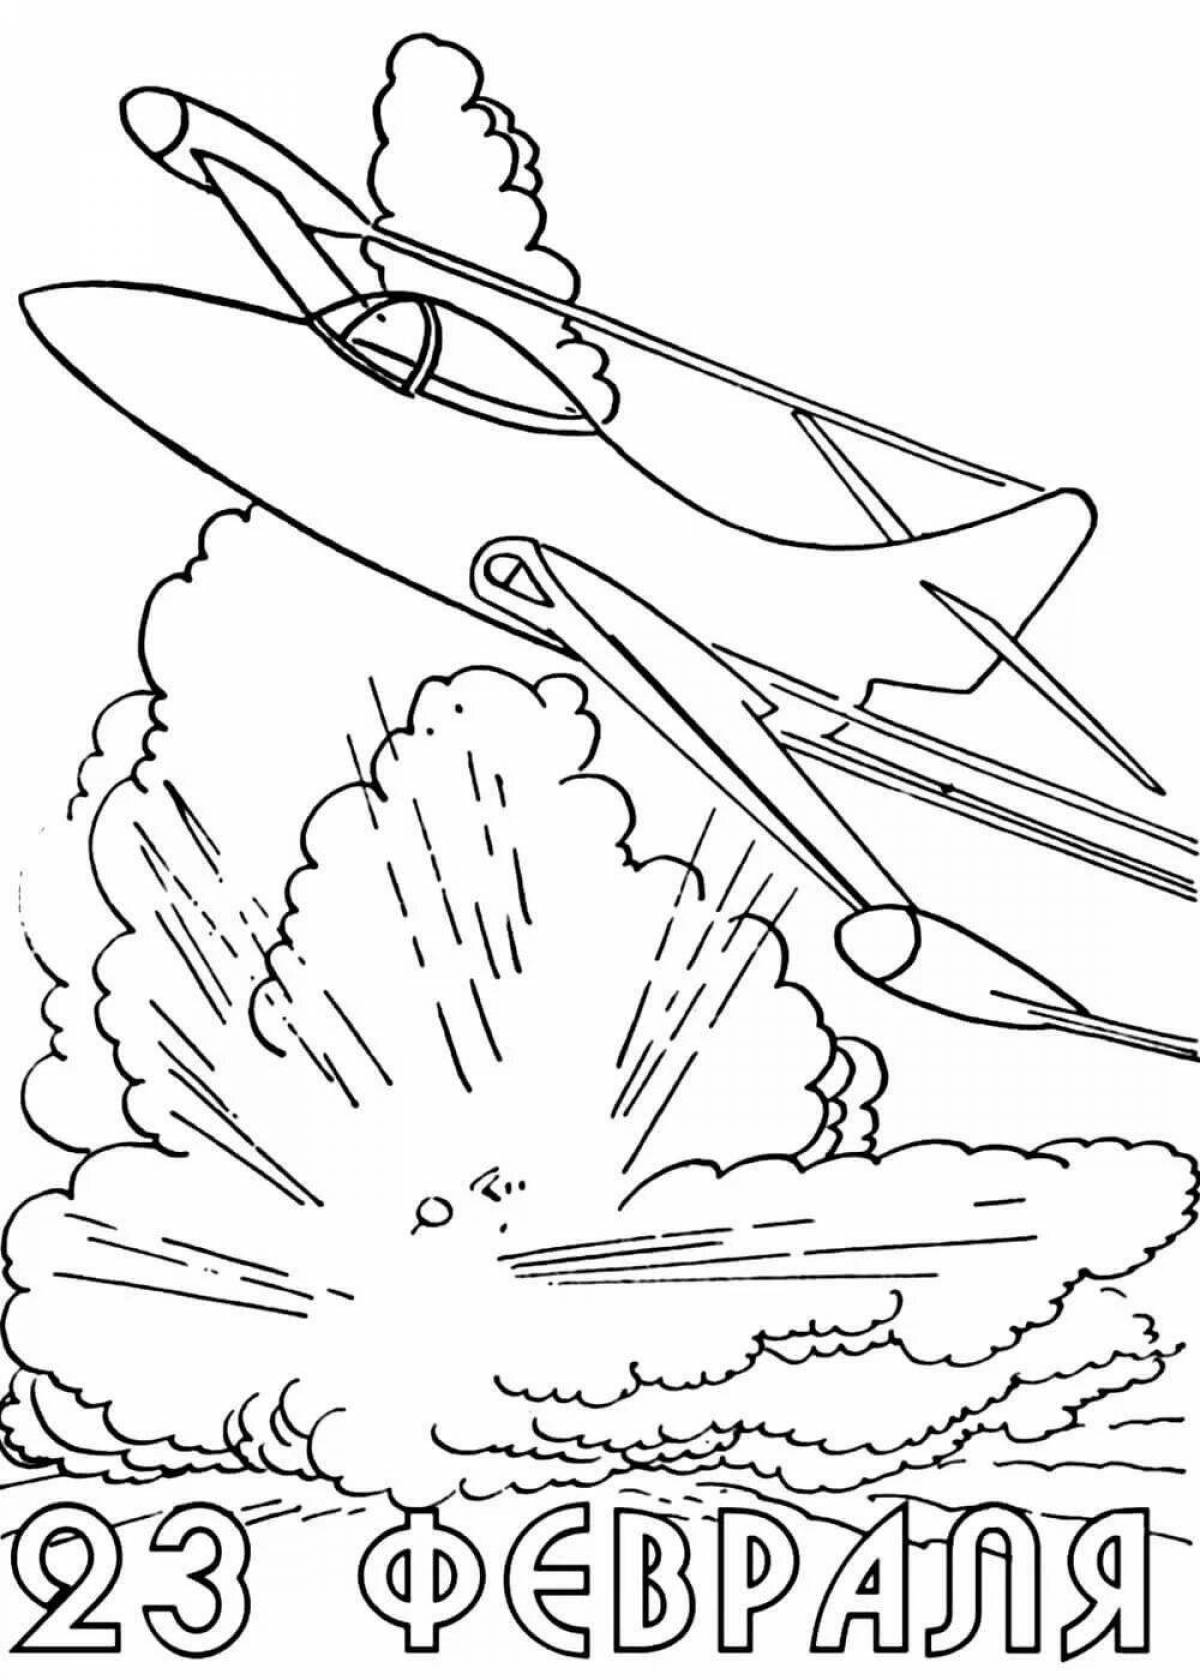 Funny easy coloring pages for February 23